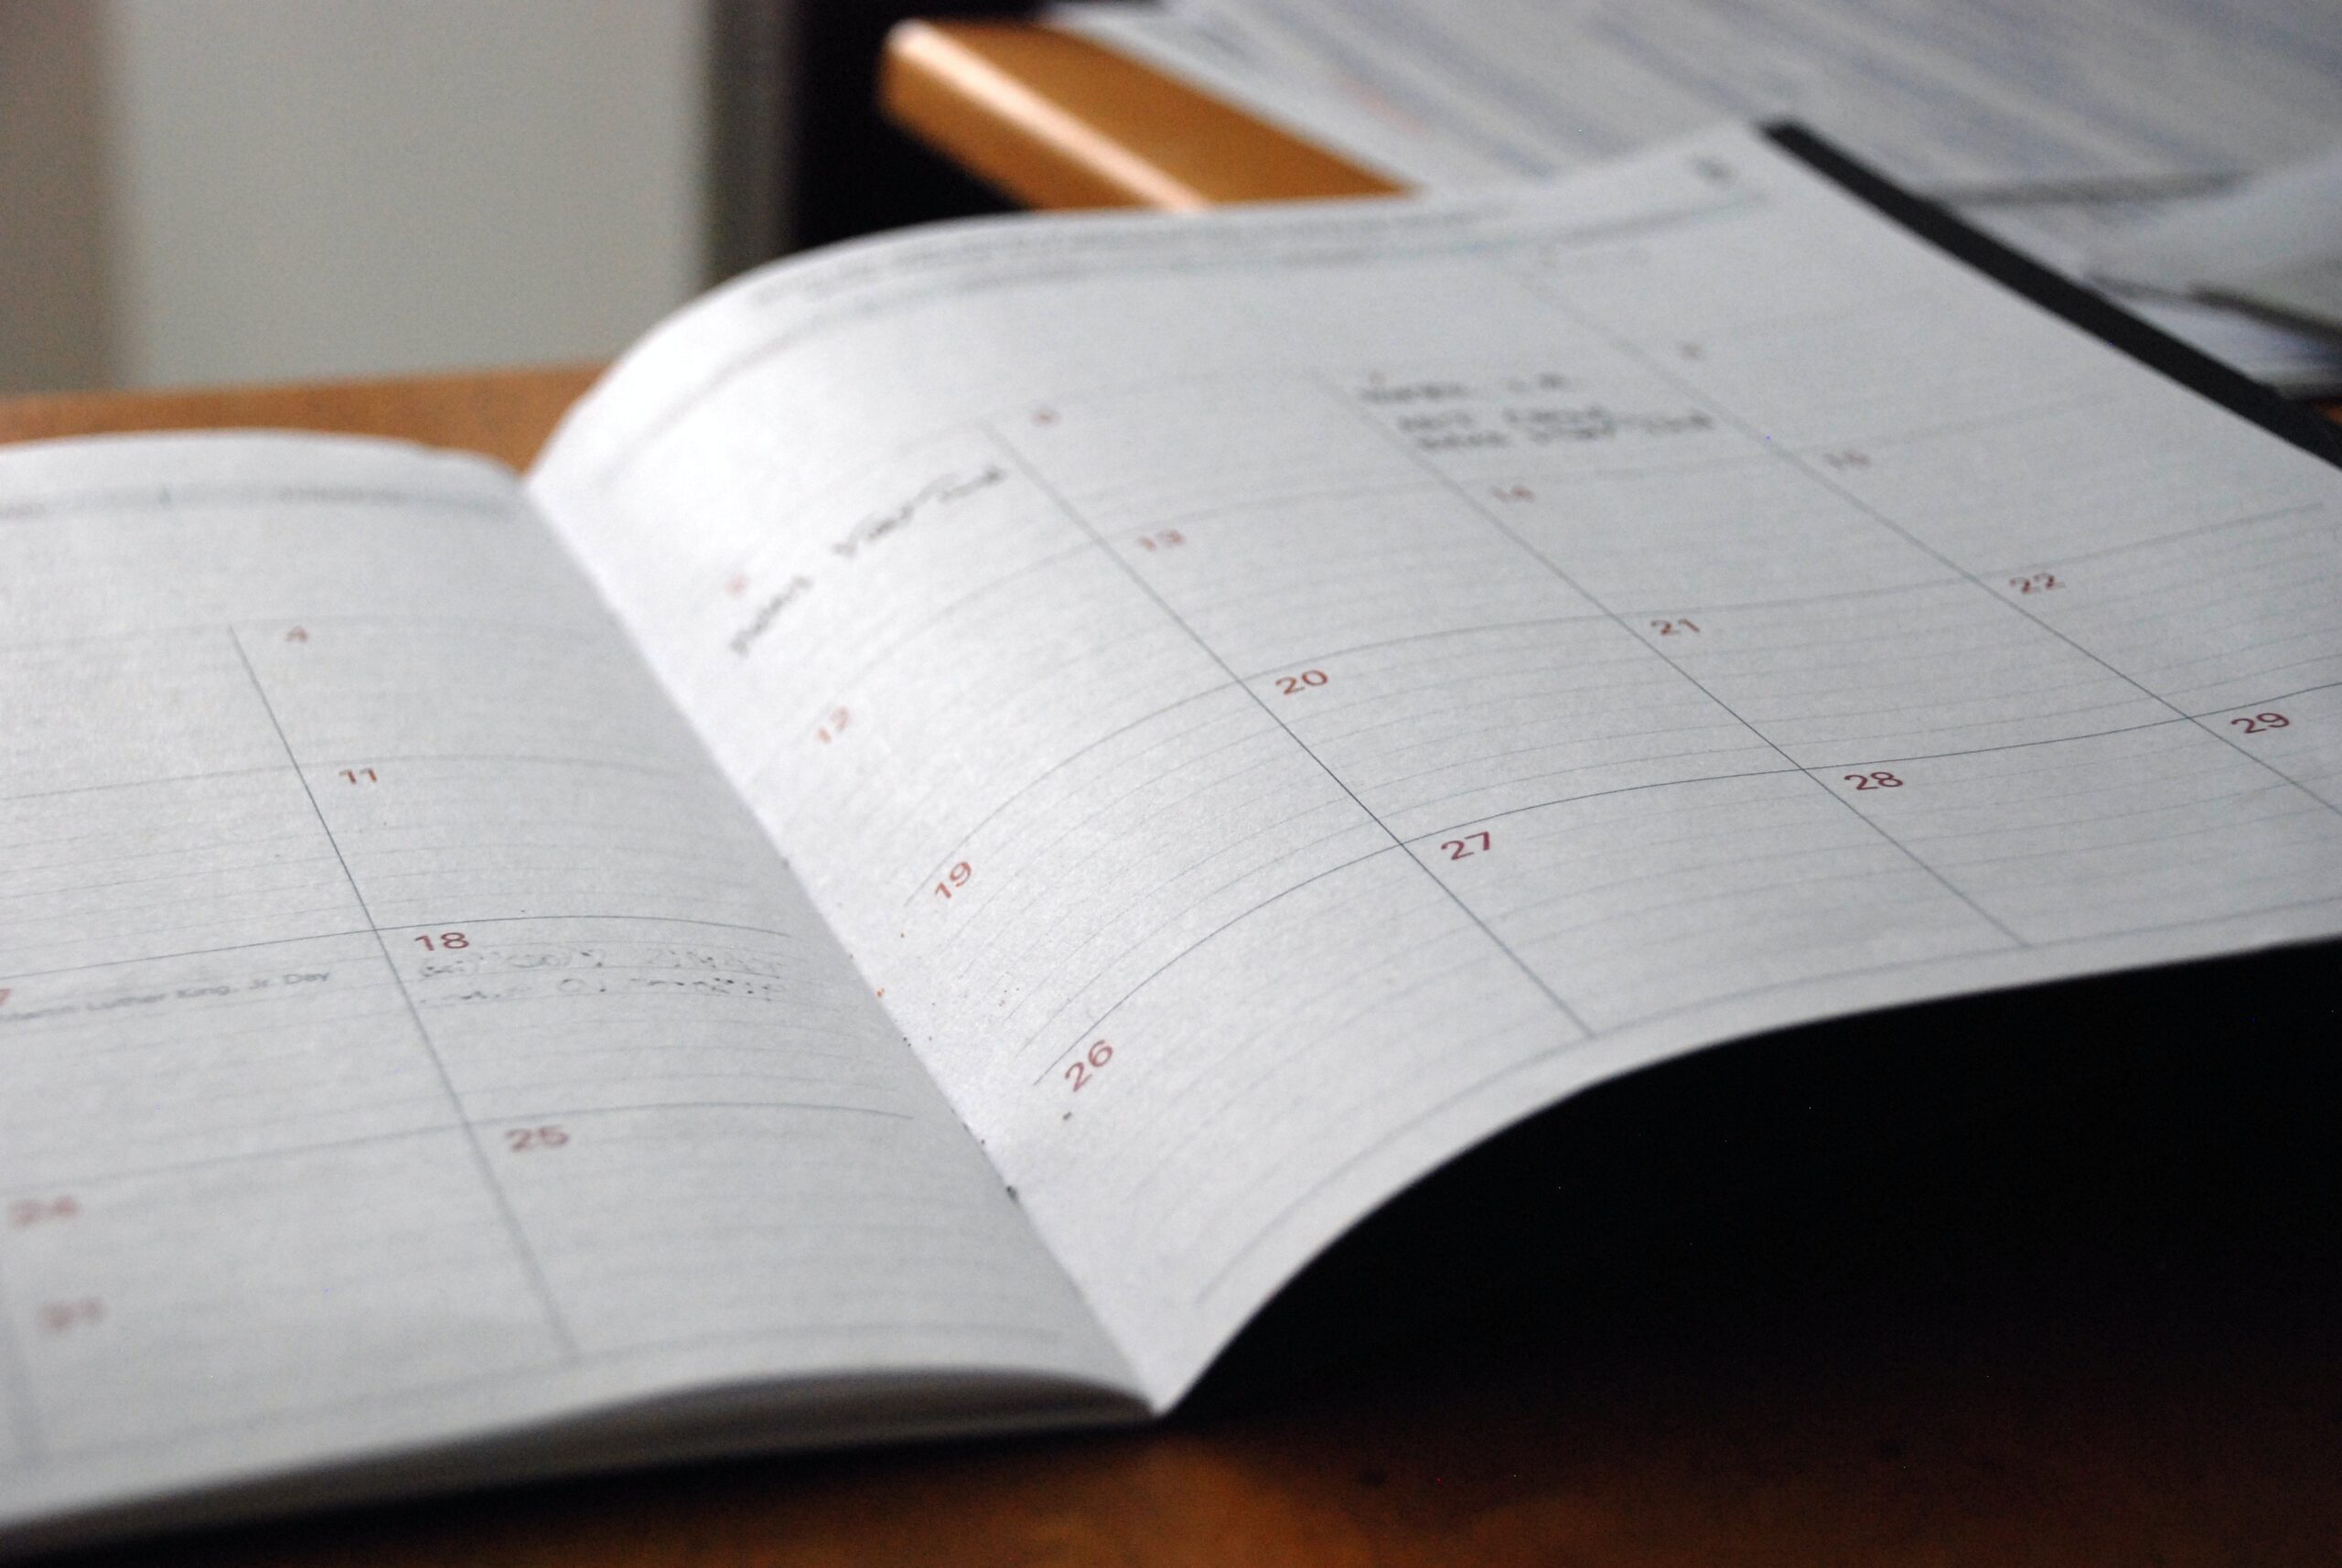 Image showing an opened book style paper calendar to support blog content on calendar automation